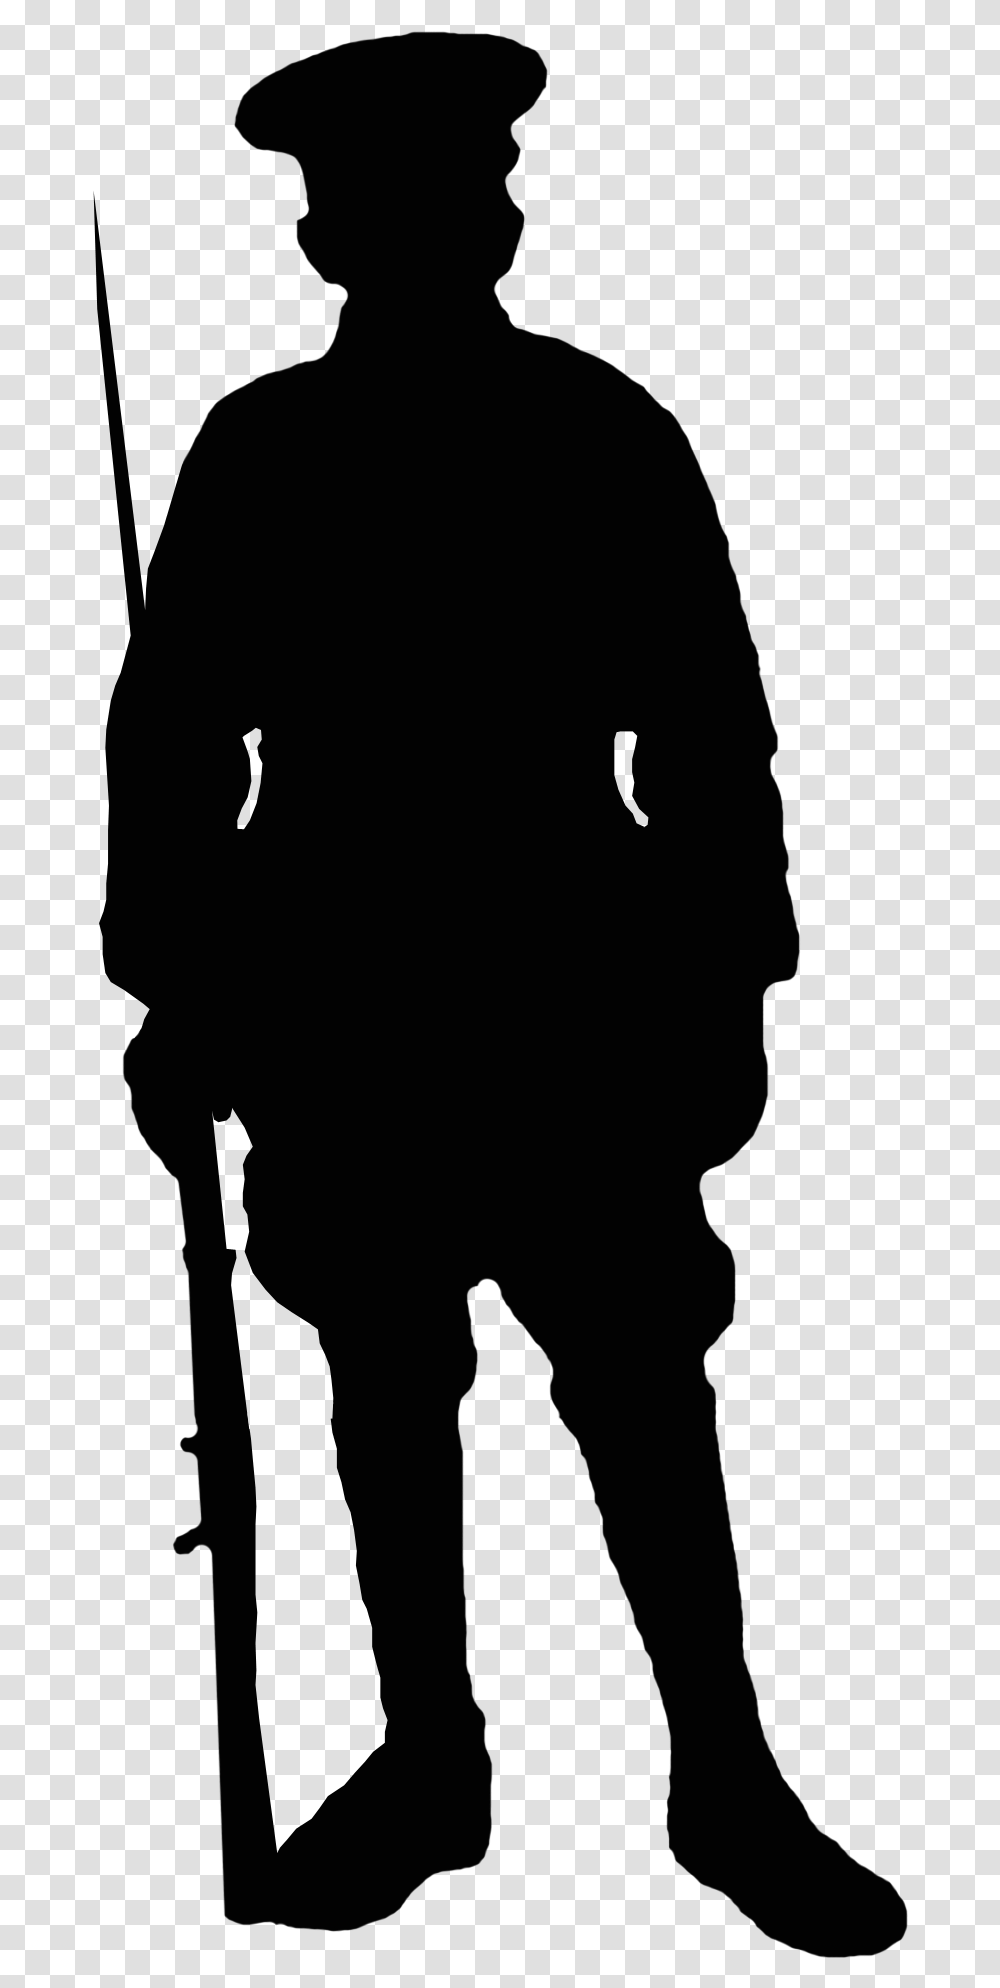 World War 1 Soldier Silhouette At Getdrawings World War 1 Soldier Silhouette, Outdoors, Nature, Person, Face Transparent Png